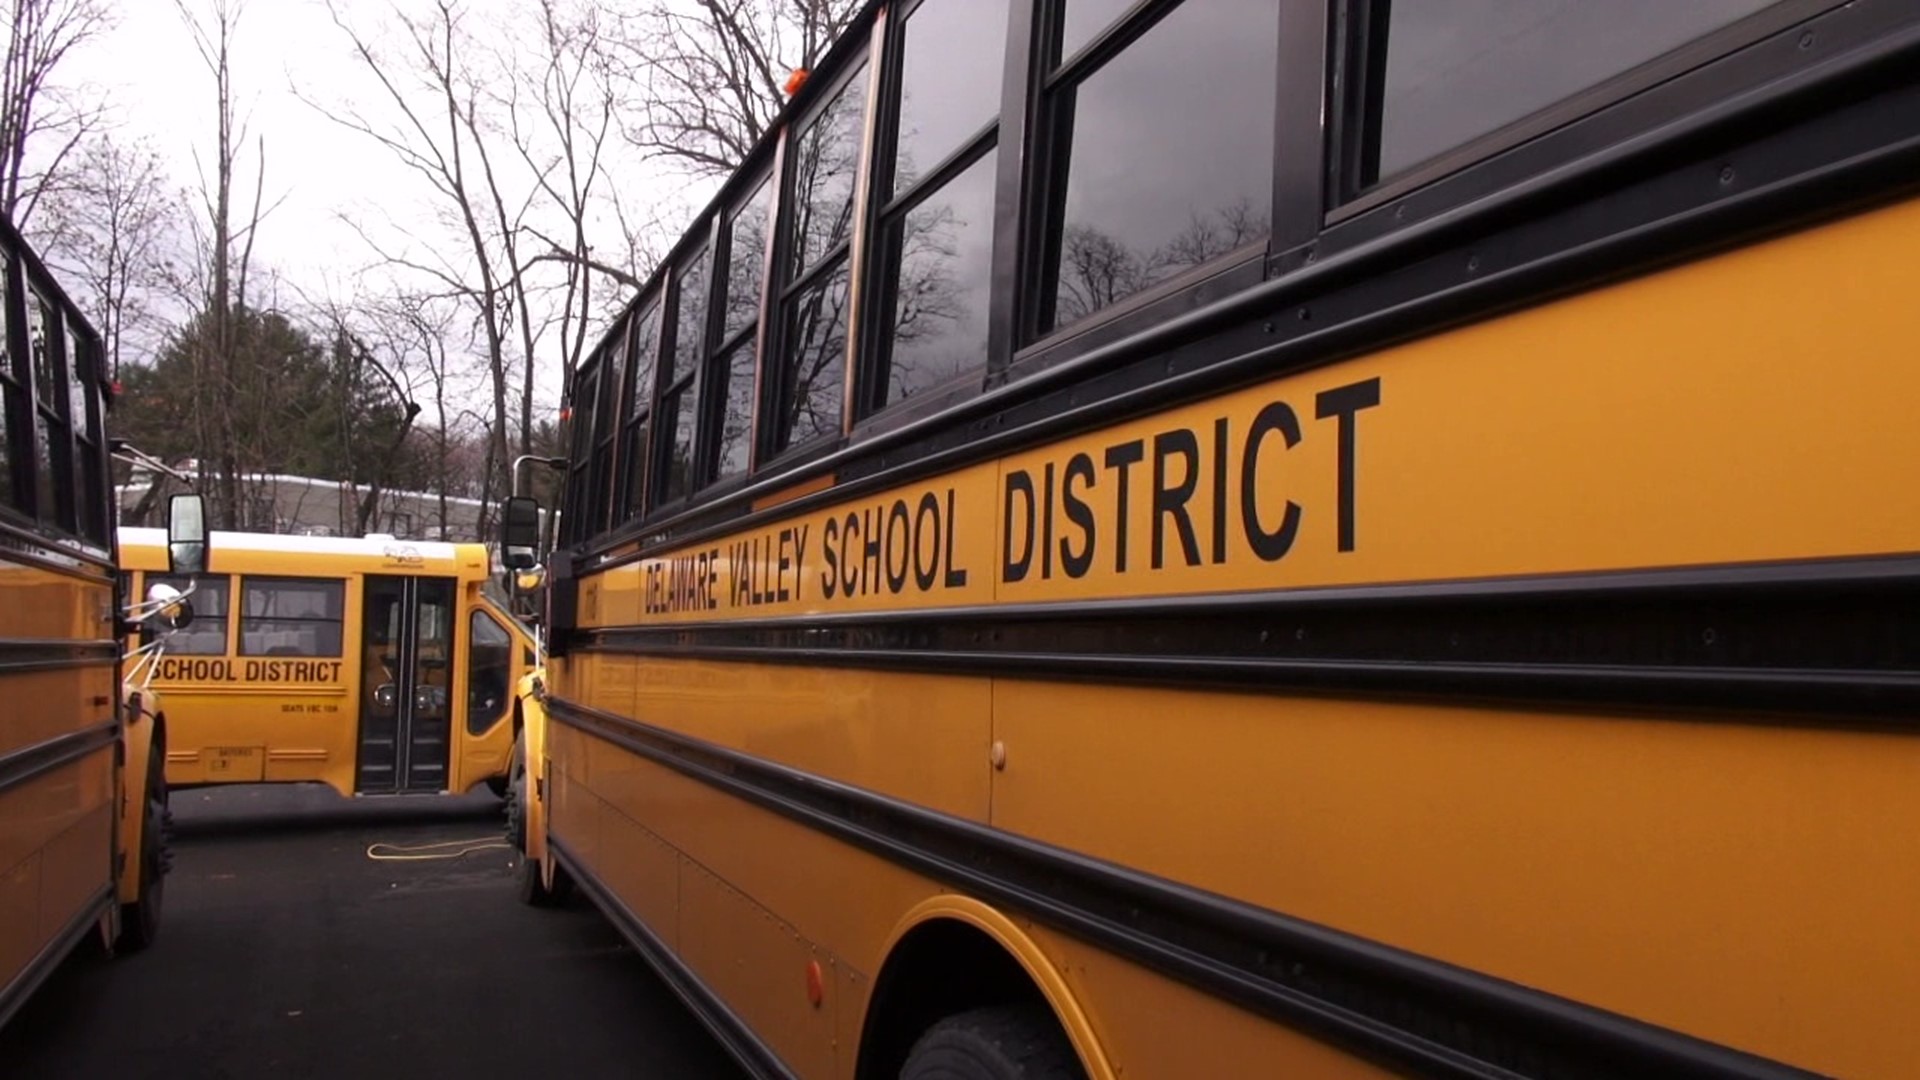 School officials and parents are scrambling to get kids back in class after positive tests sidelined many of the district's bus drivers.